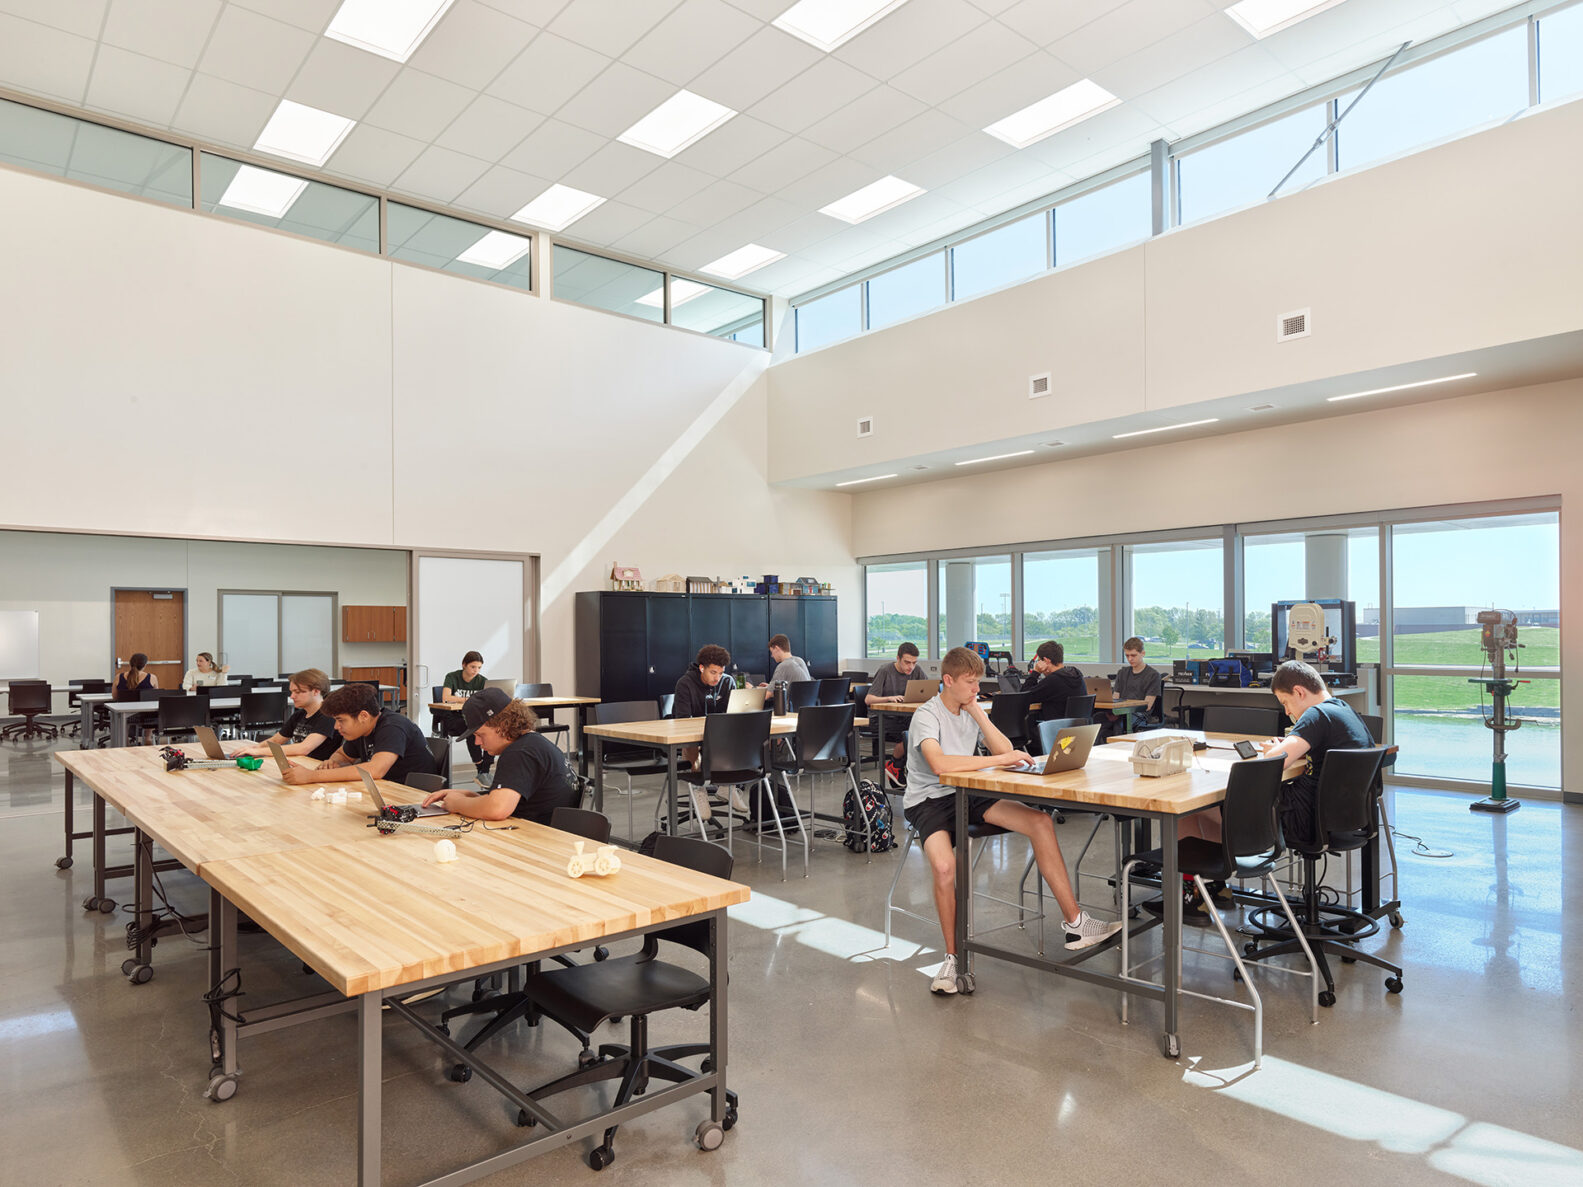 Students at Staley High School collaborating in a classroom built by McCownGordon Construction in north kansas city